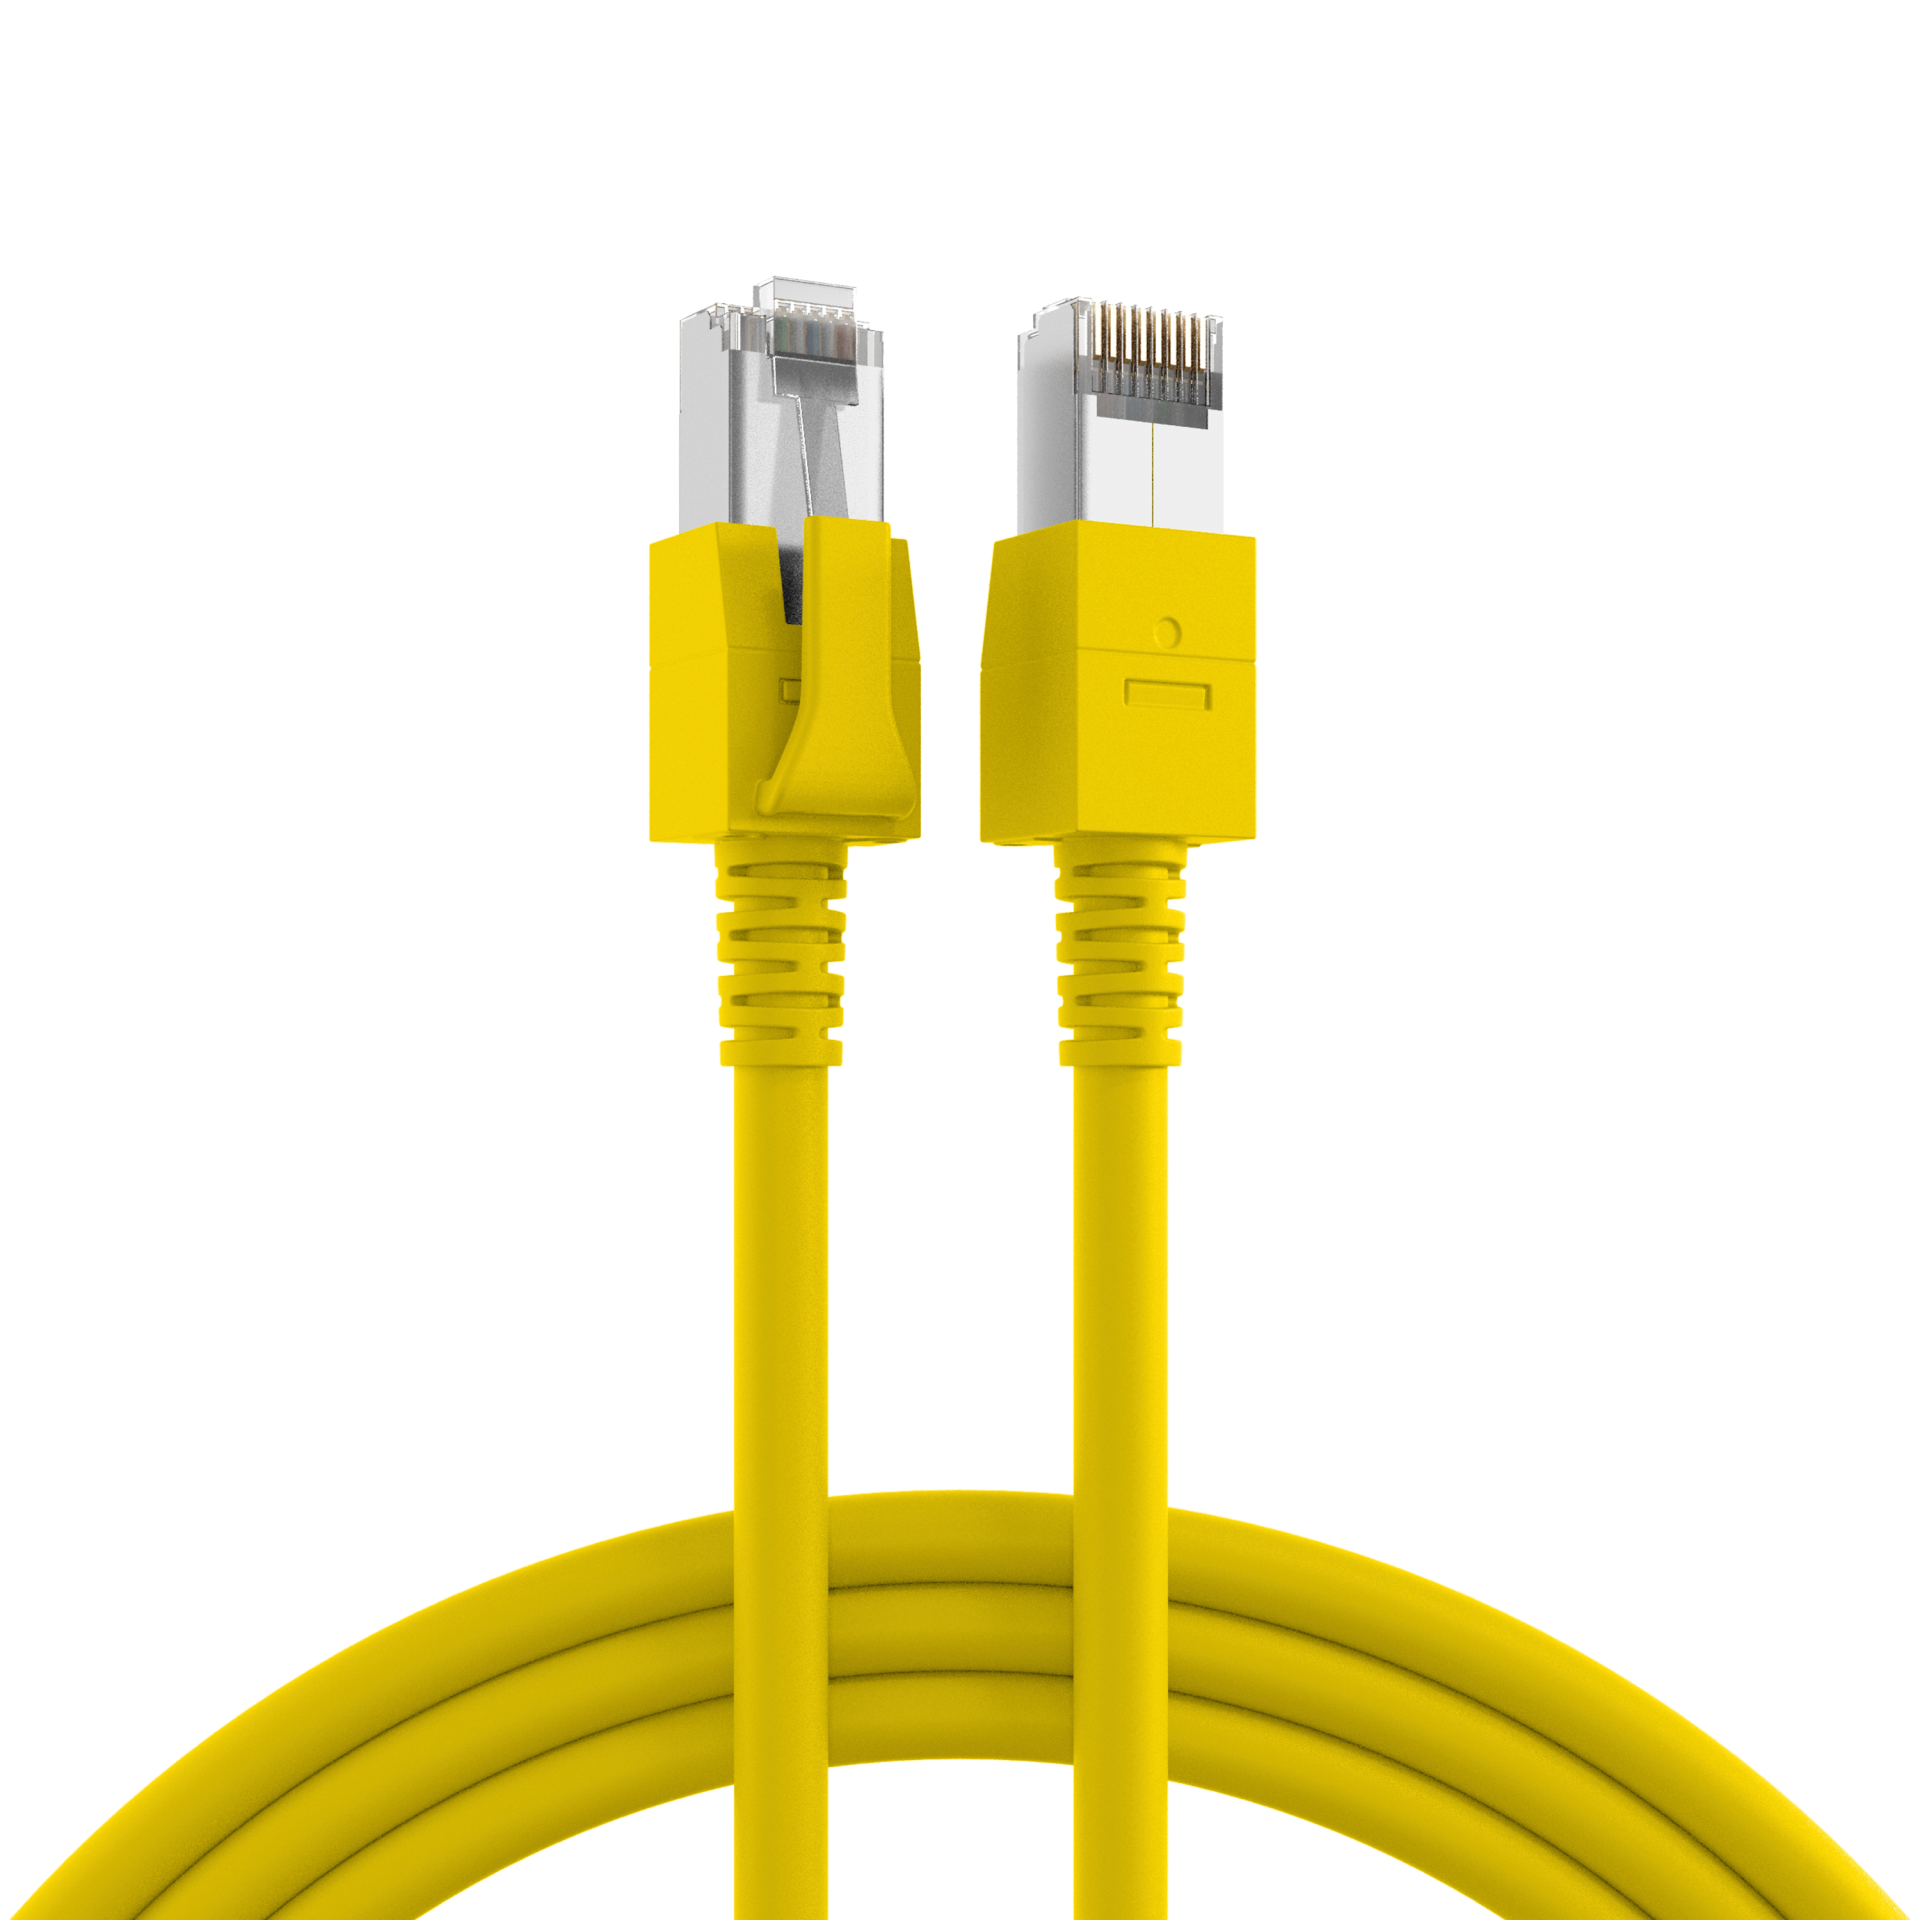 RJ45 Patch Cord Cat.6A S/FTP FRNC VC LED yellow 7m